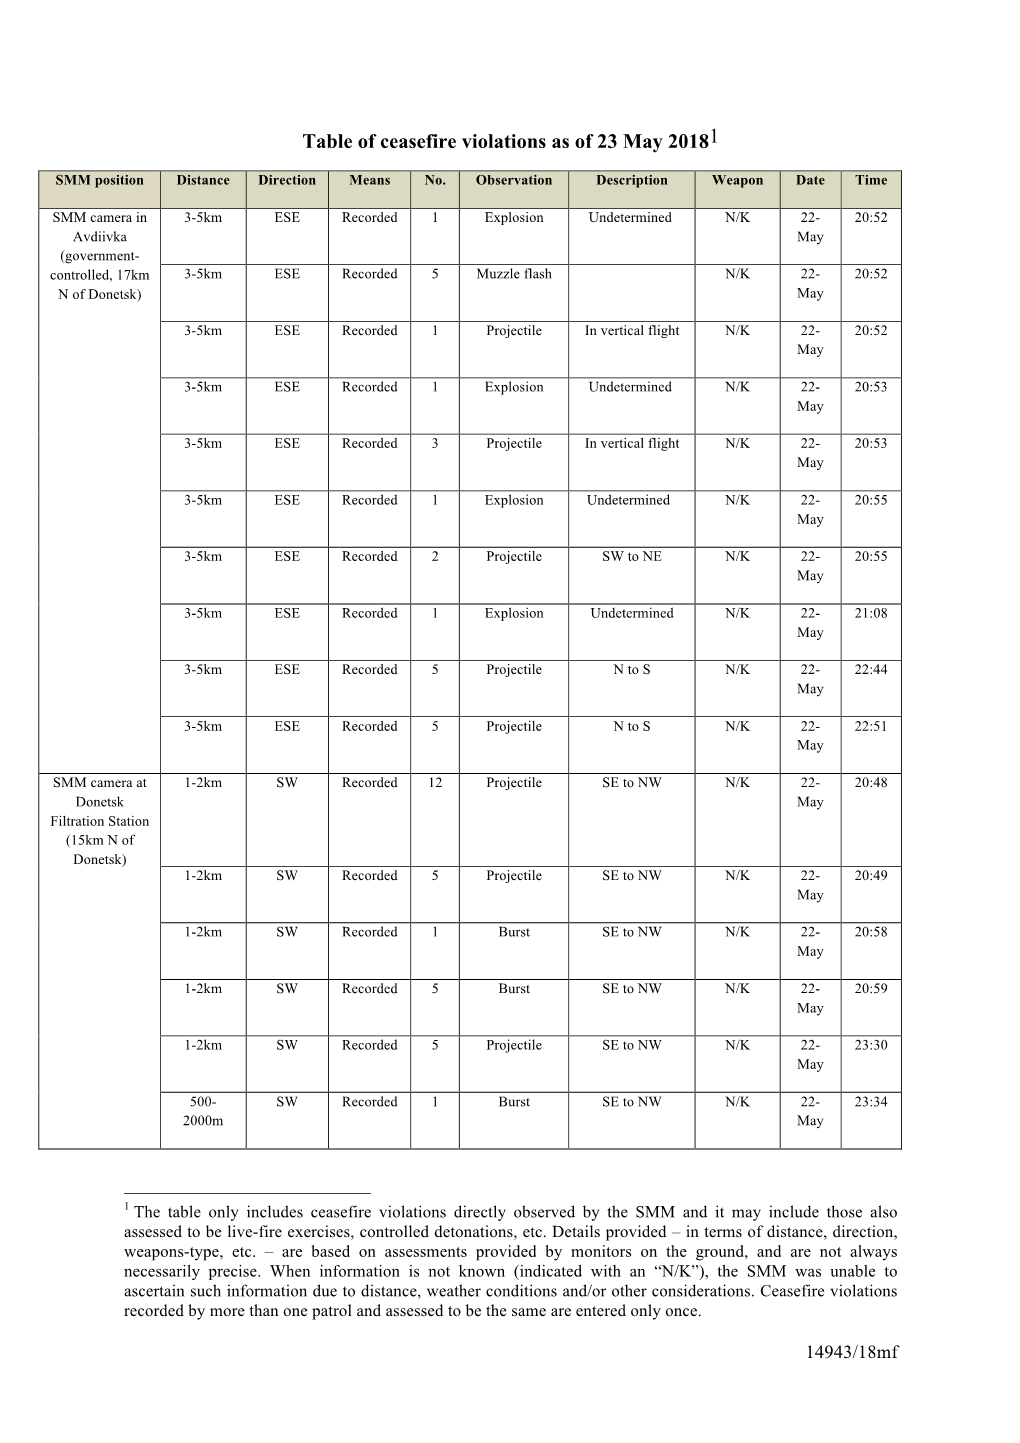 Table of Ceasefire Violations As of 23 May 2018 1